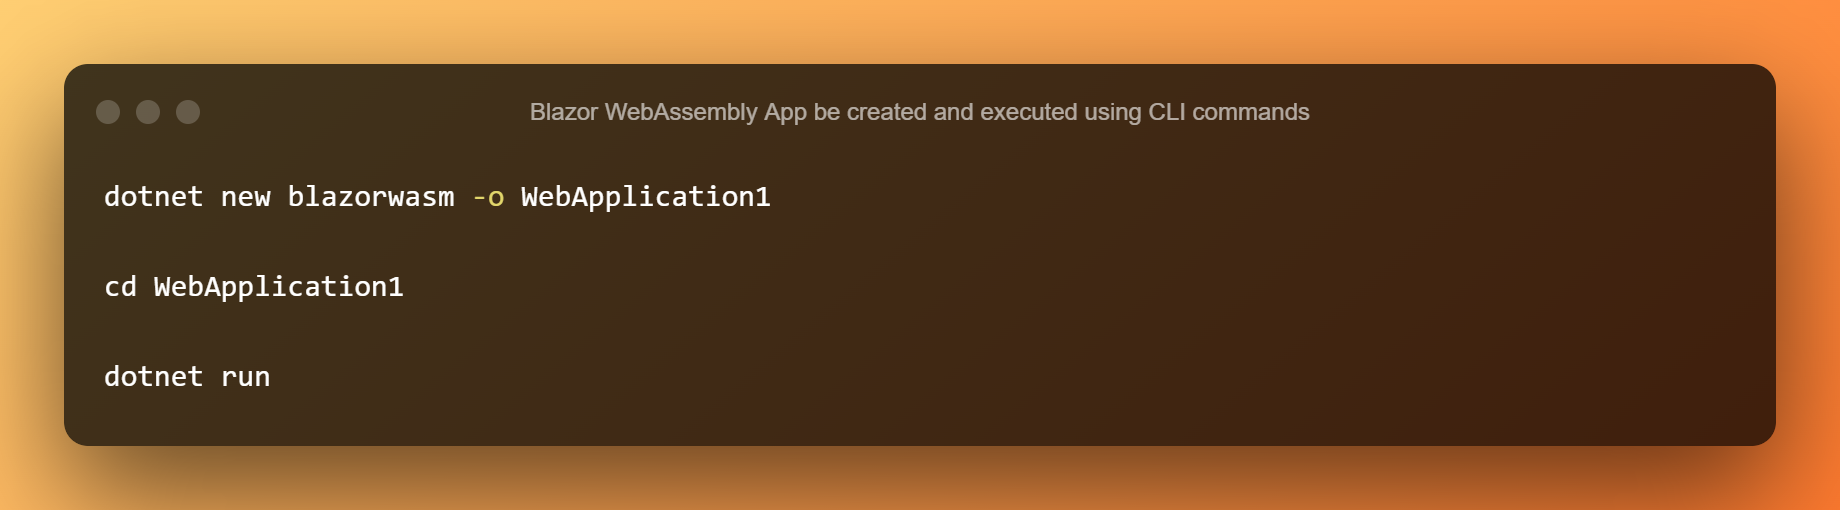 Blazor WebAssembly App Be Created And Executed Using CLI Commands